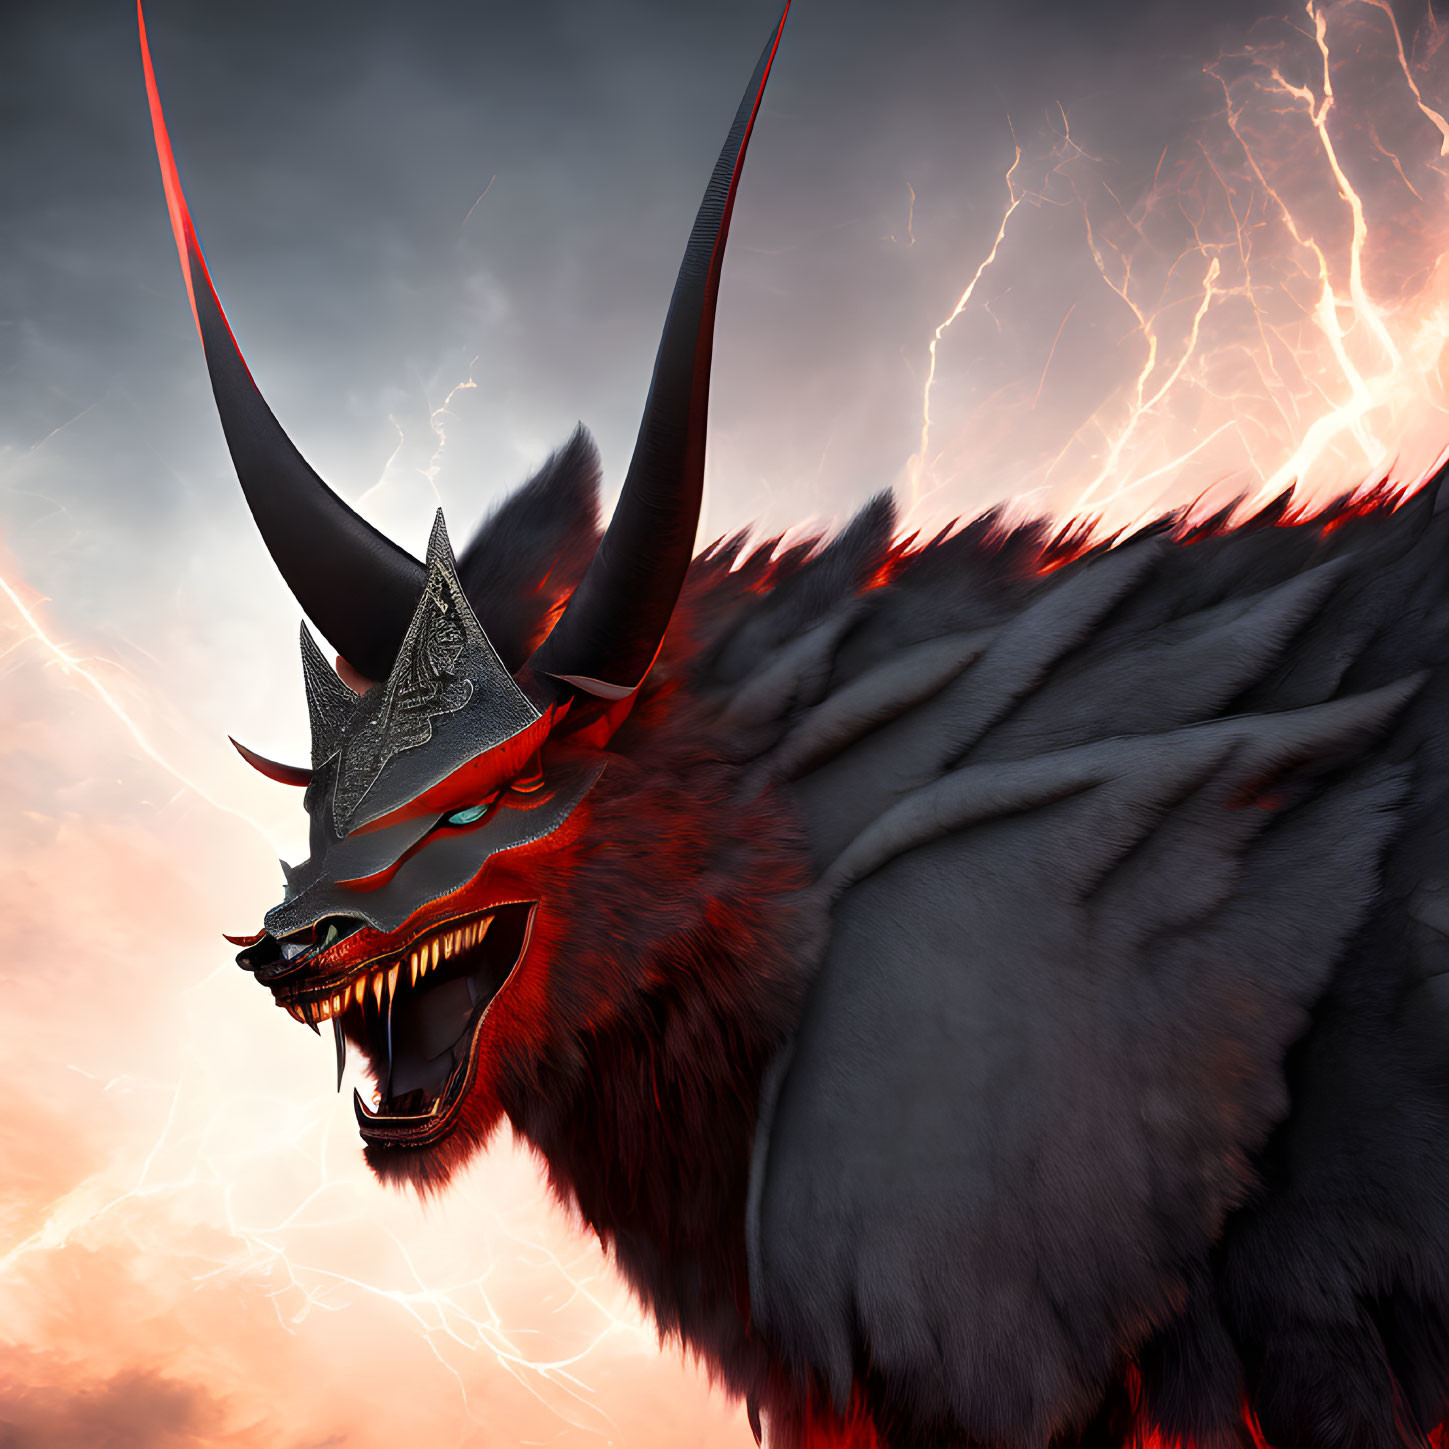 Stylized red-eyed dragon with sharp horns in dramatic sky